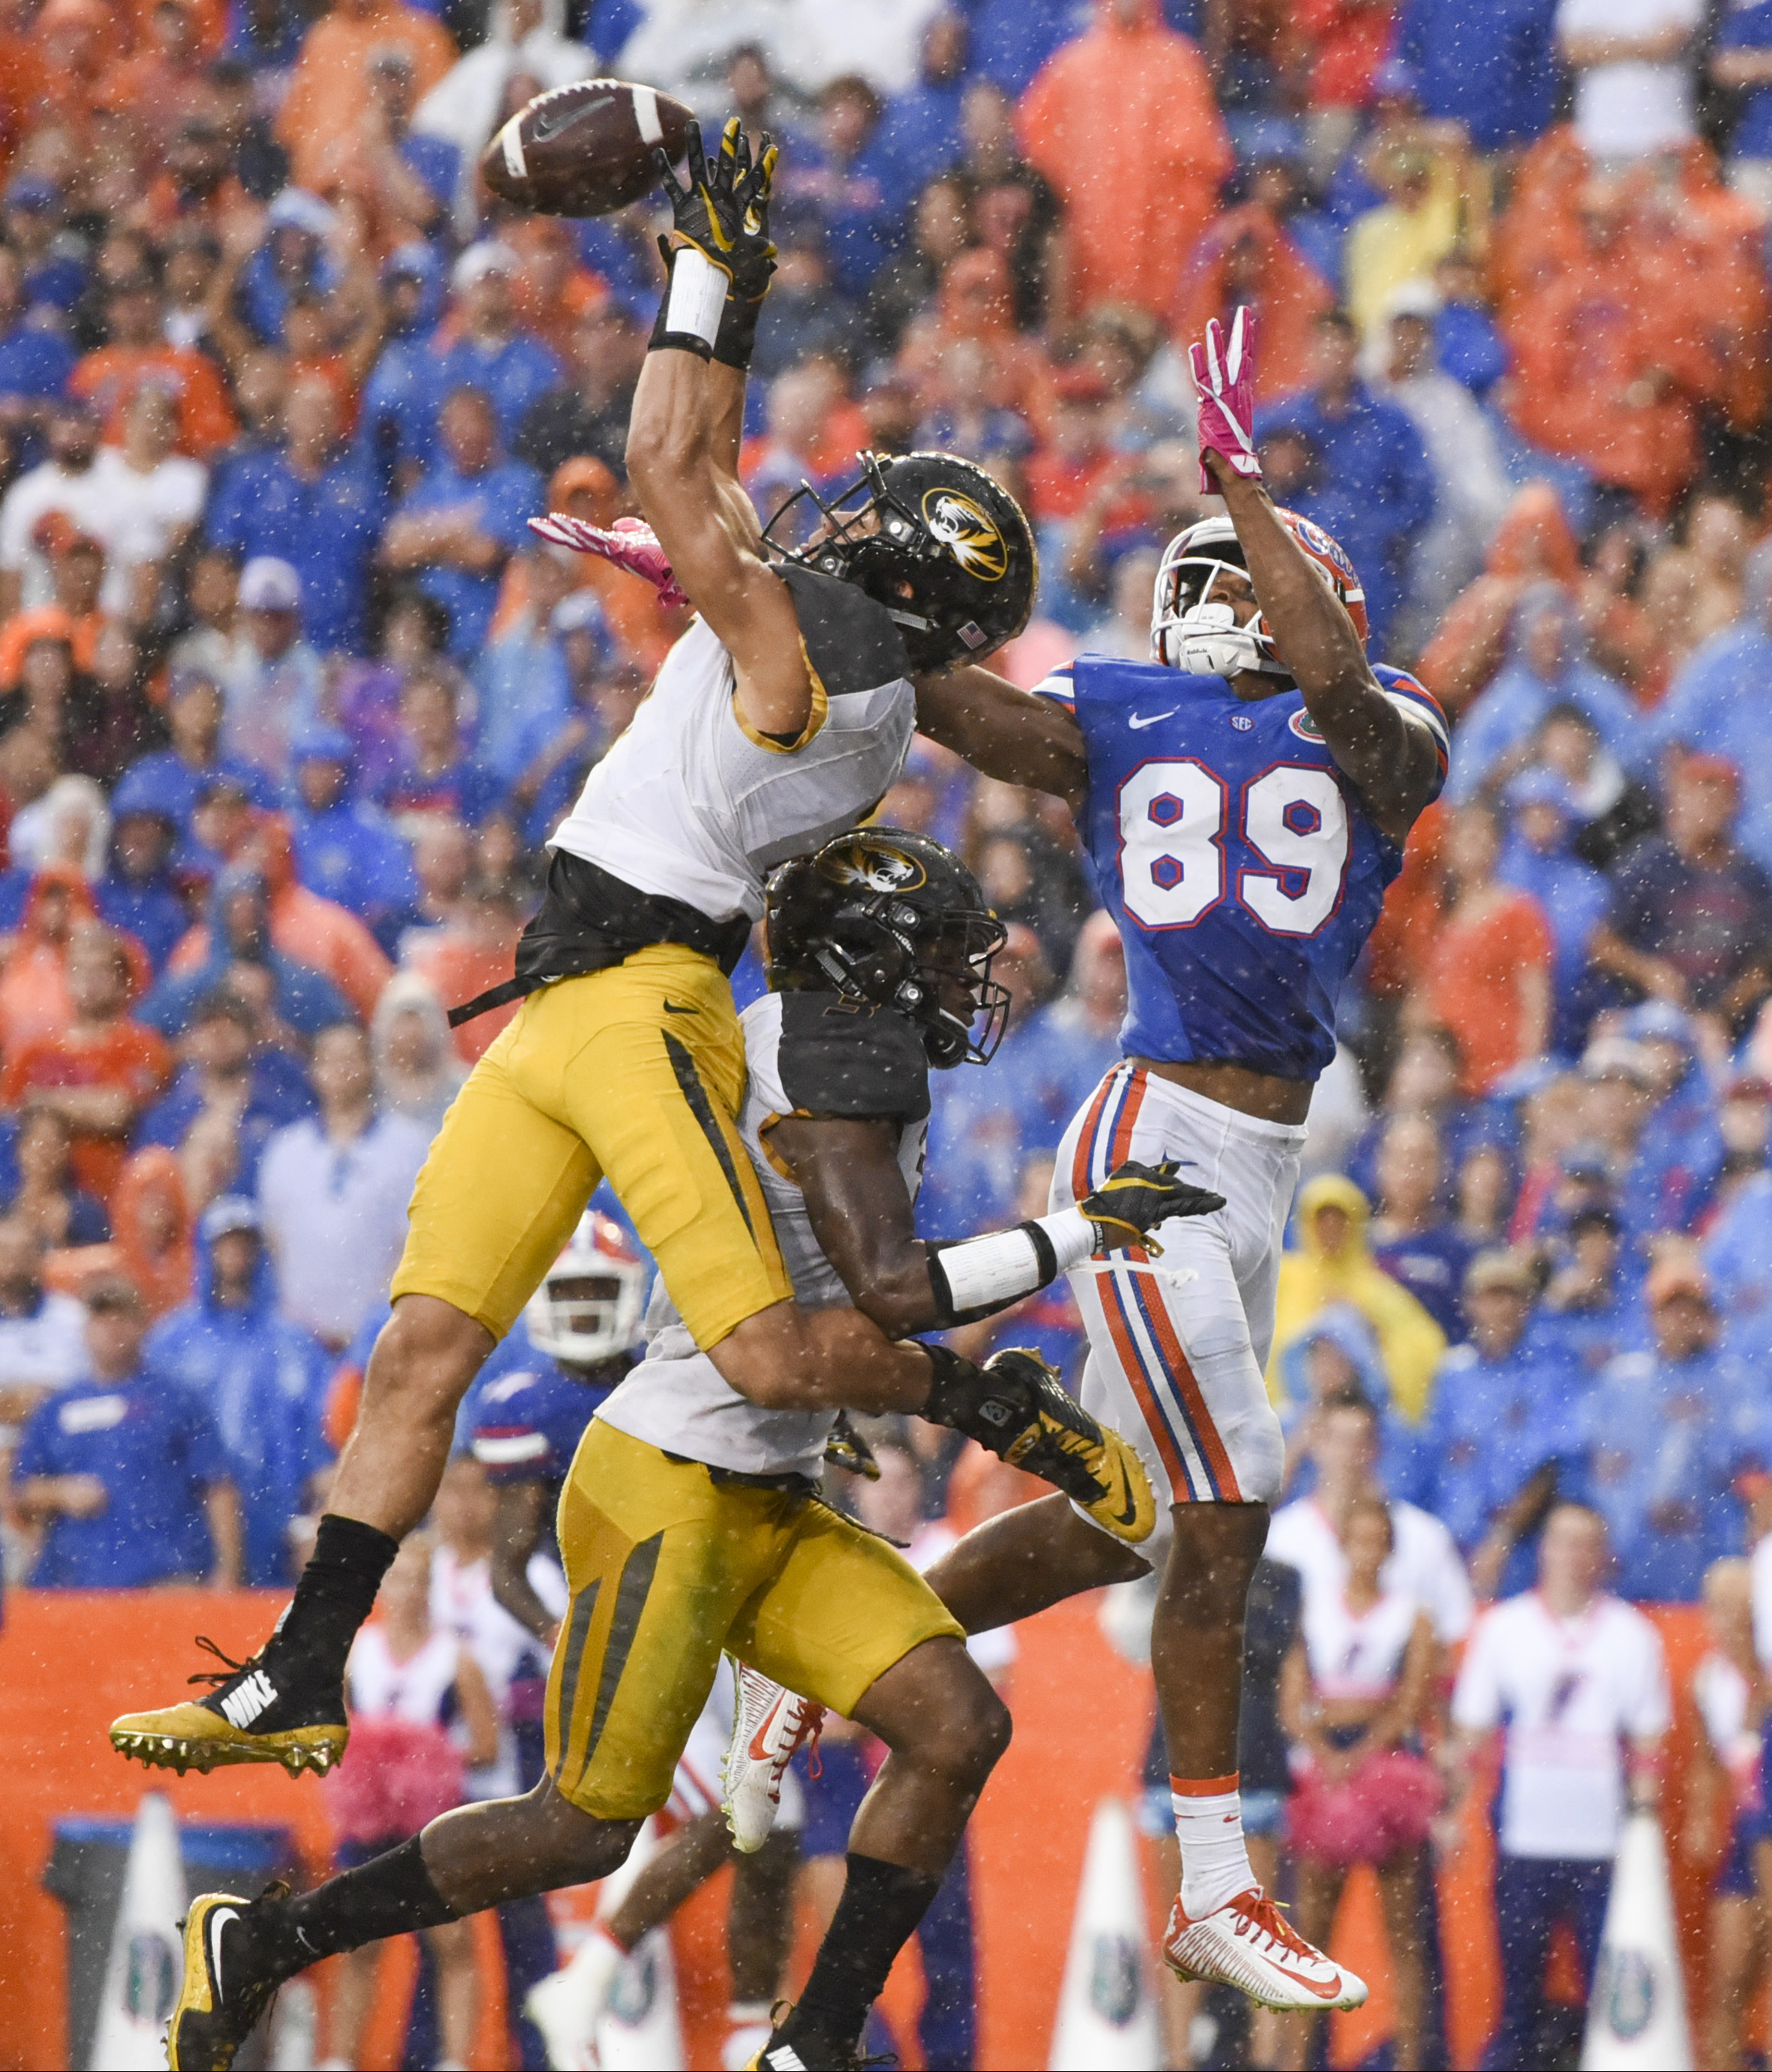  Missouri Tigers safety Cam Hilton (7) nearly intercepts a pass intended for Florida Gators wide receiver Tyrie Cleveland (89) in the third quarter during the game between the Florida Gators and the Missouri Tigers in Ben Hill Griffin Stadium in Gain